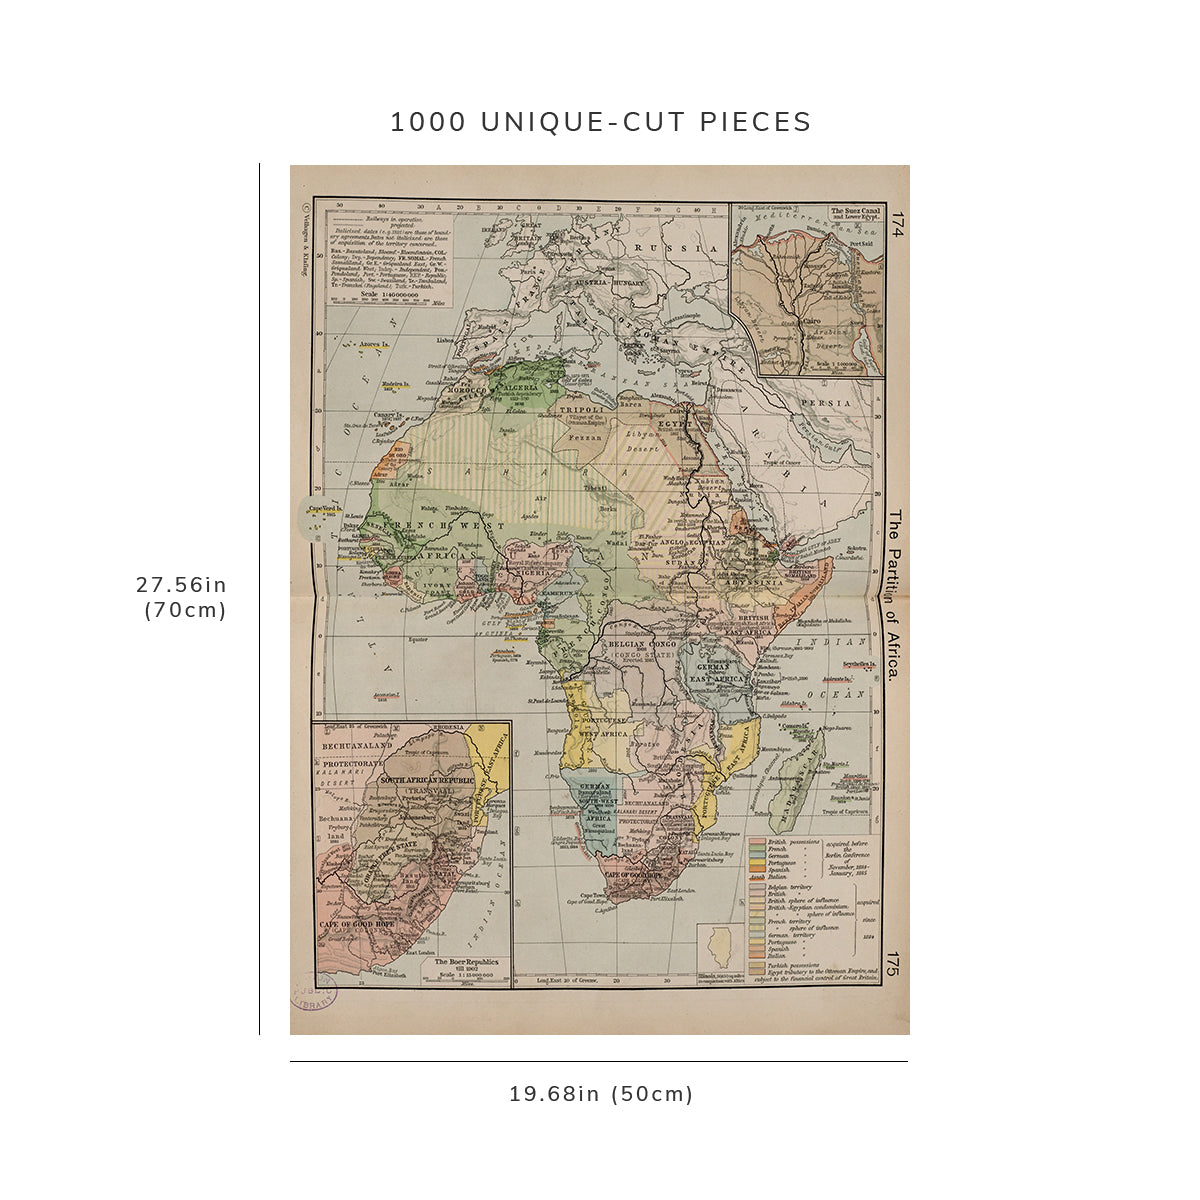 1000 Piece Jigsaw Puzzle: 1911 Map | The partition of Africa Relief shown